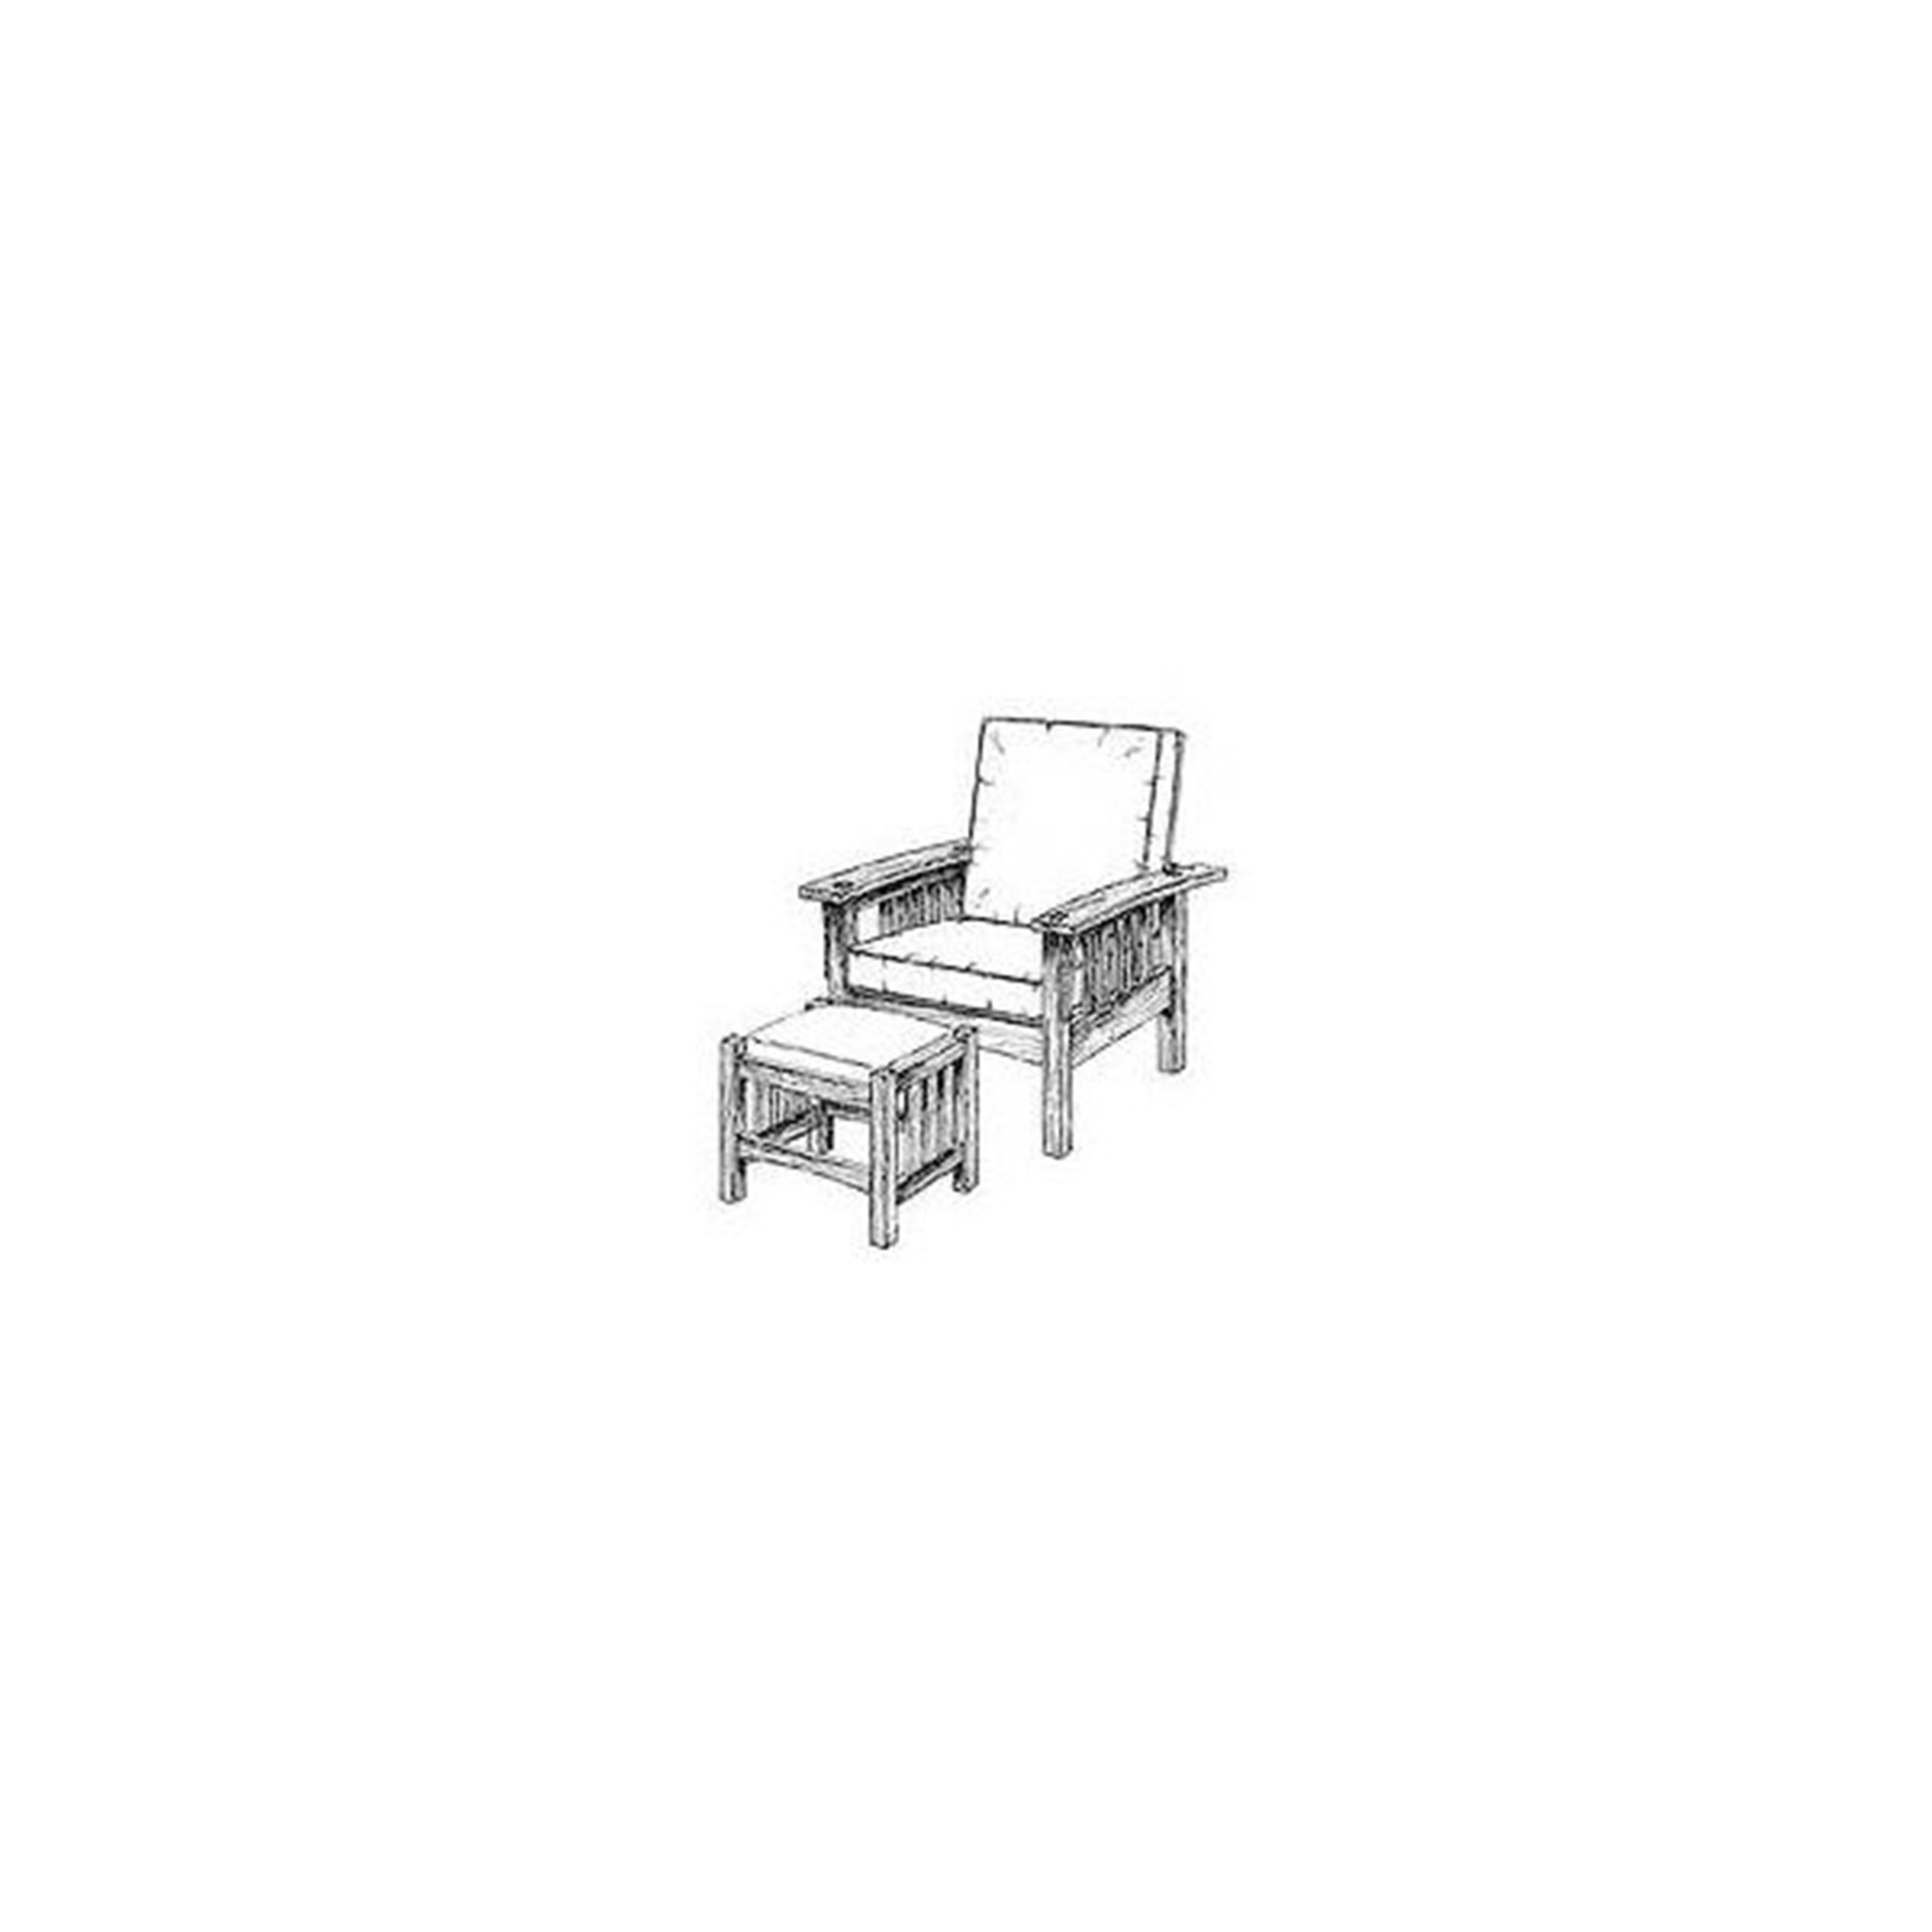 Woodworking Project Paper Plan To Build Morris Chair And Footrest